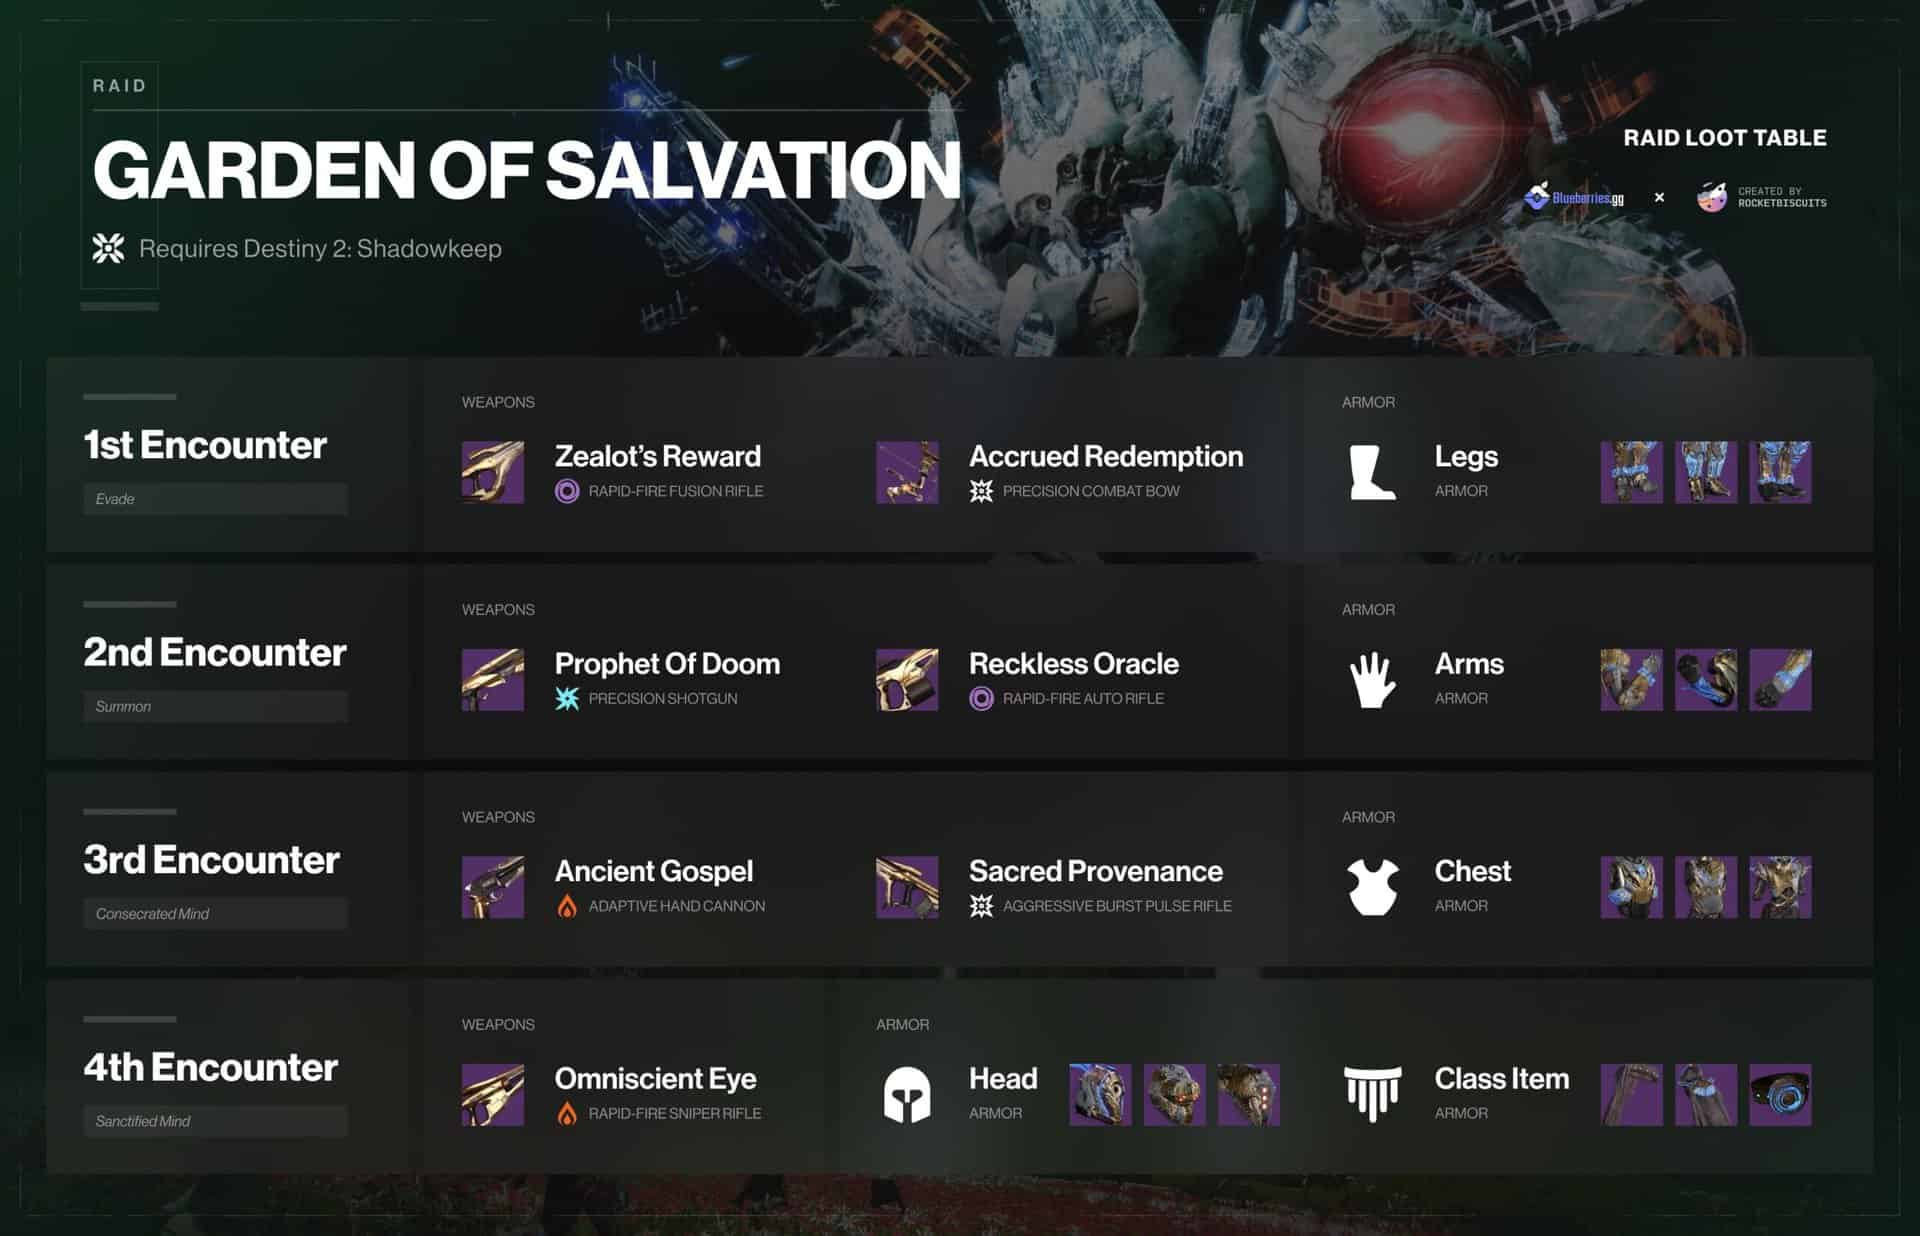 Garden of Salvation loot table infographic